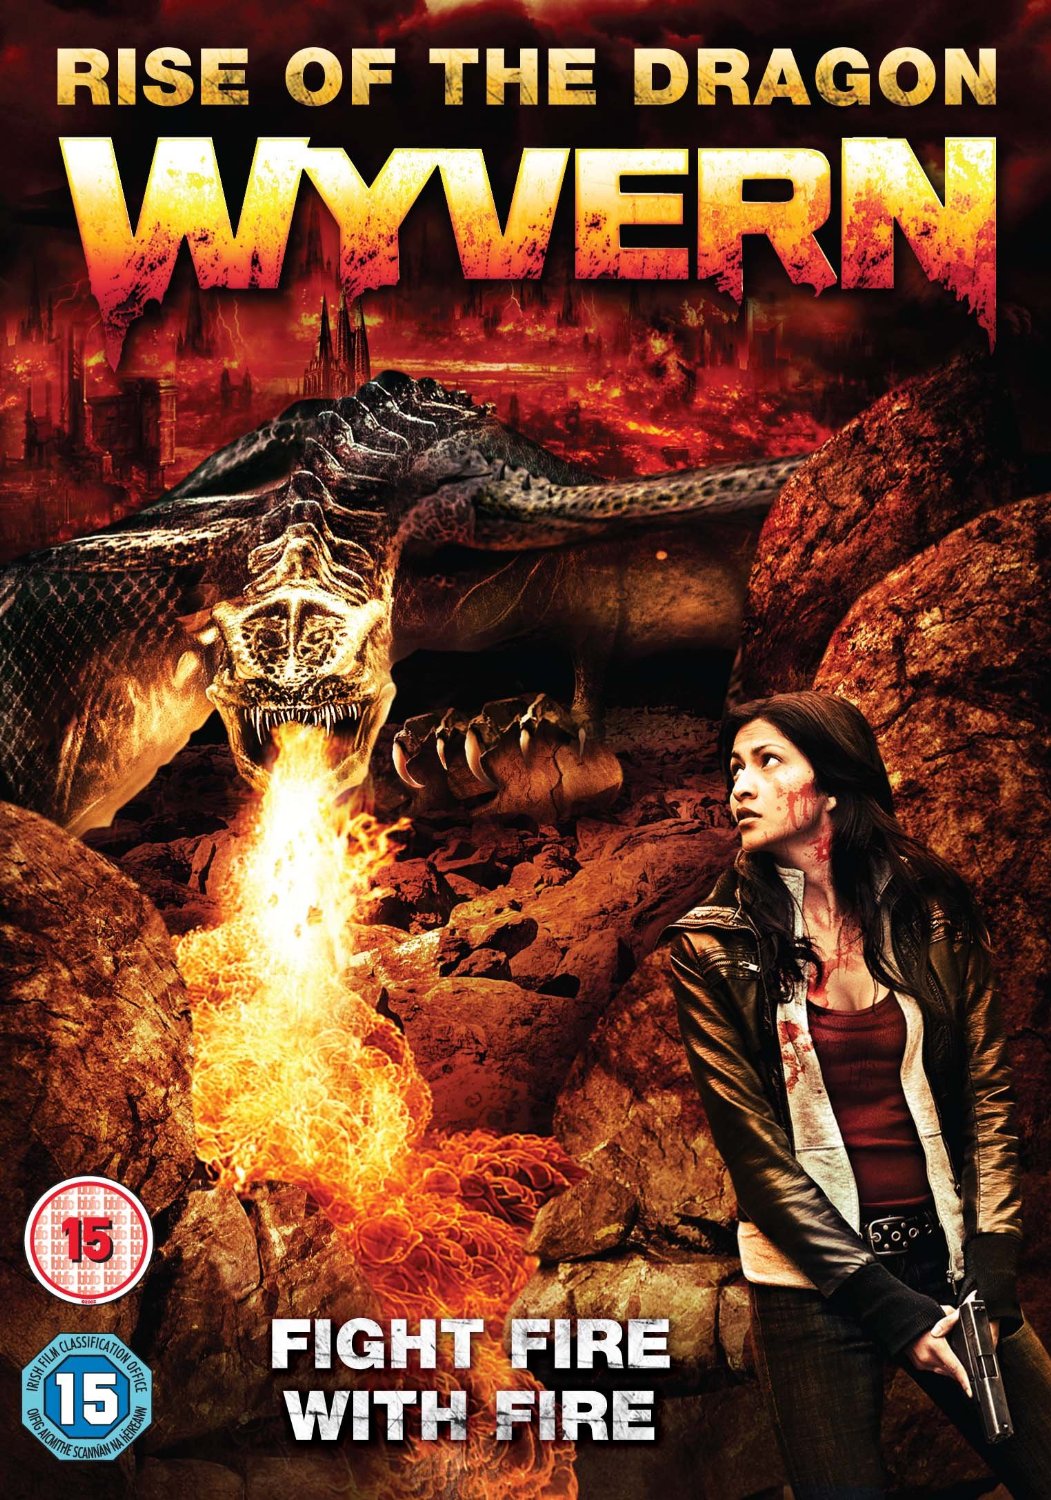  Wyvern.2009.1080p.BluRay.x264.DTS-FGT 8.06GB-1.png